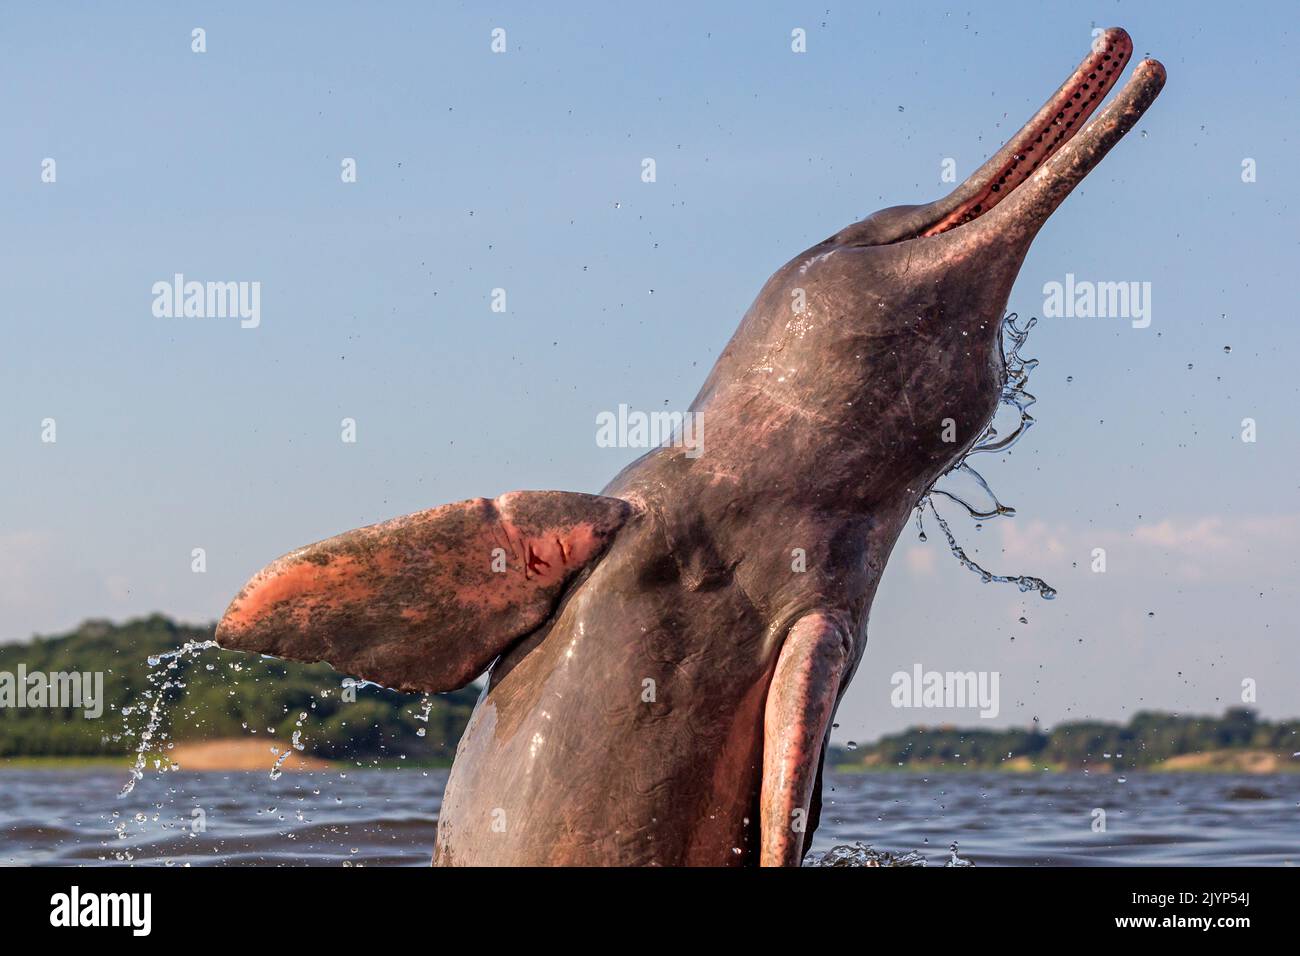 Amazon River Dolphin, Pink River Dolphin or Boto (Inia geoffrensis) , extremely rare picture of wild animal breaching , Threatened species (IUCN Red List), along Rio Negro, Amazon river basin, Amazonas state, Manaus, Brazil, South America Stock Photo